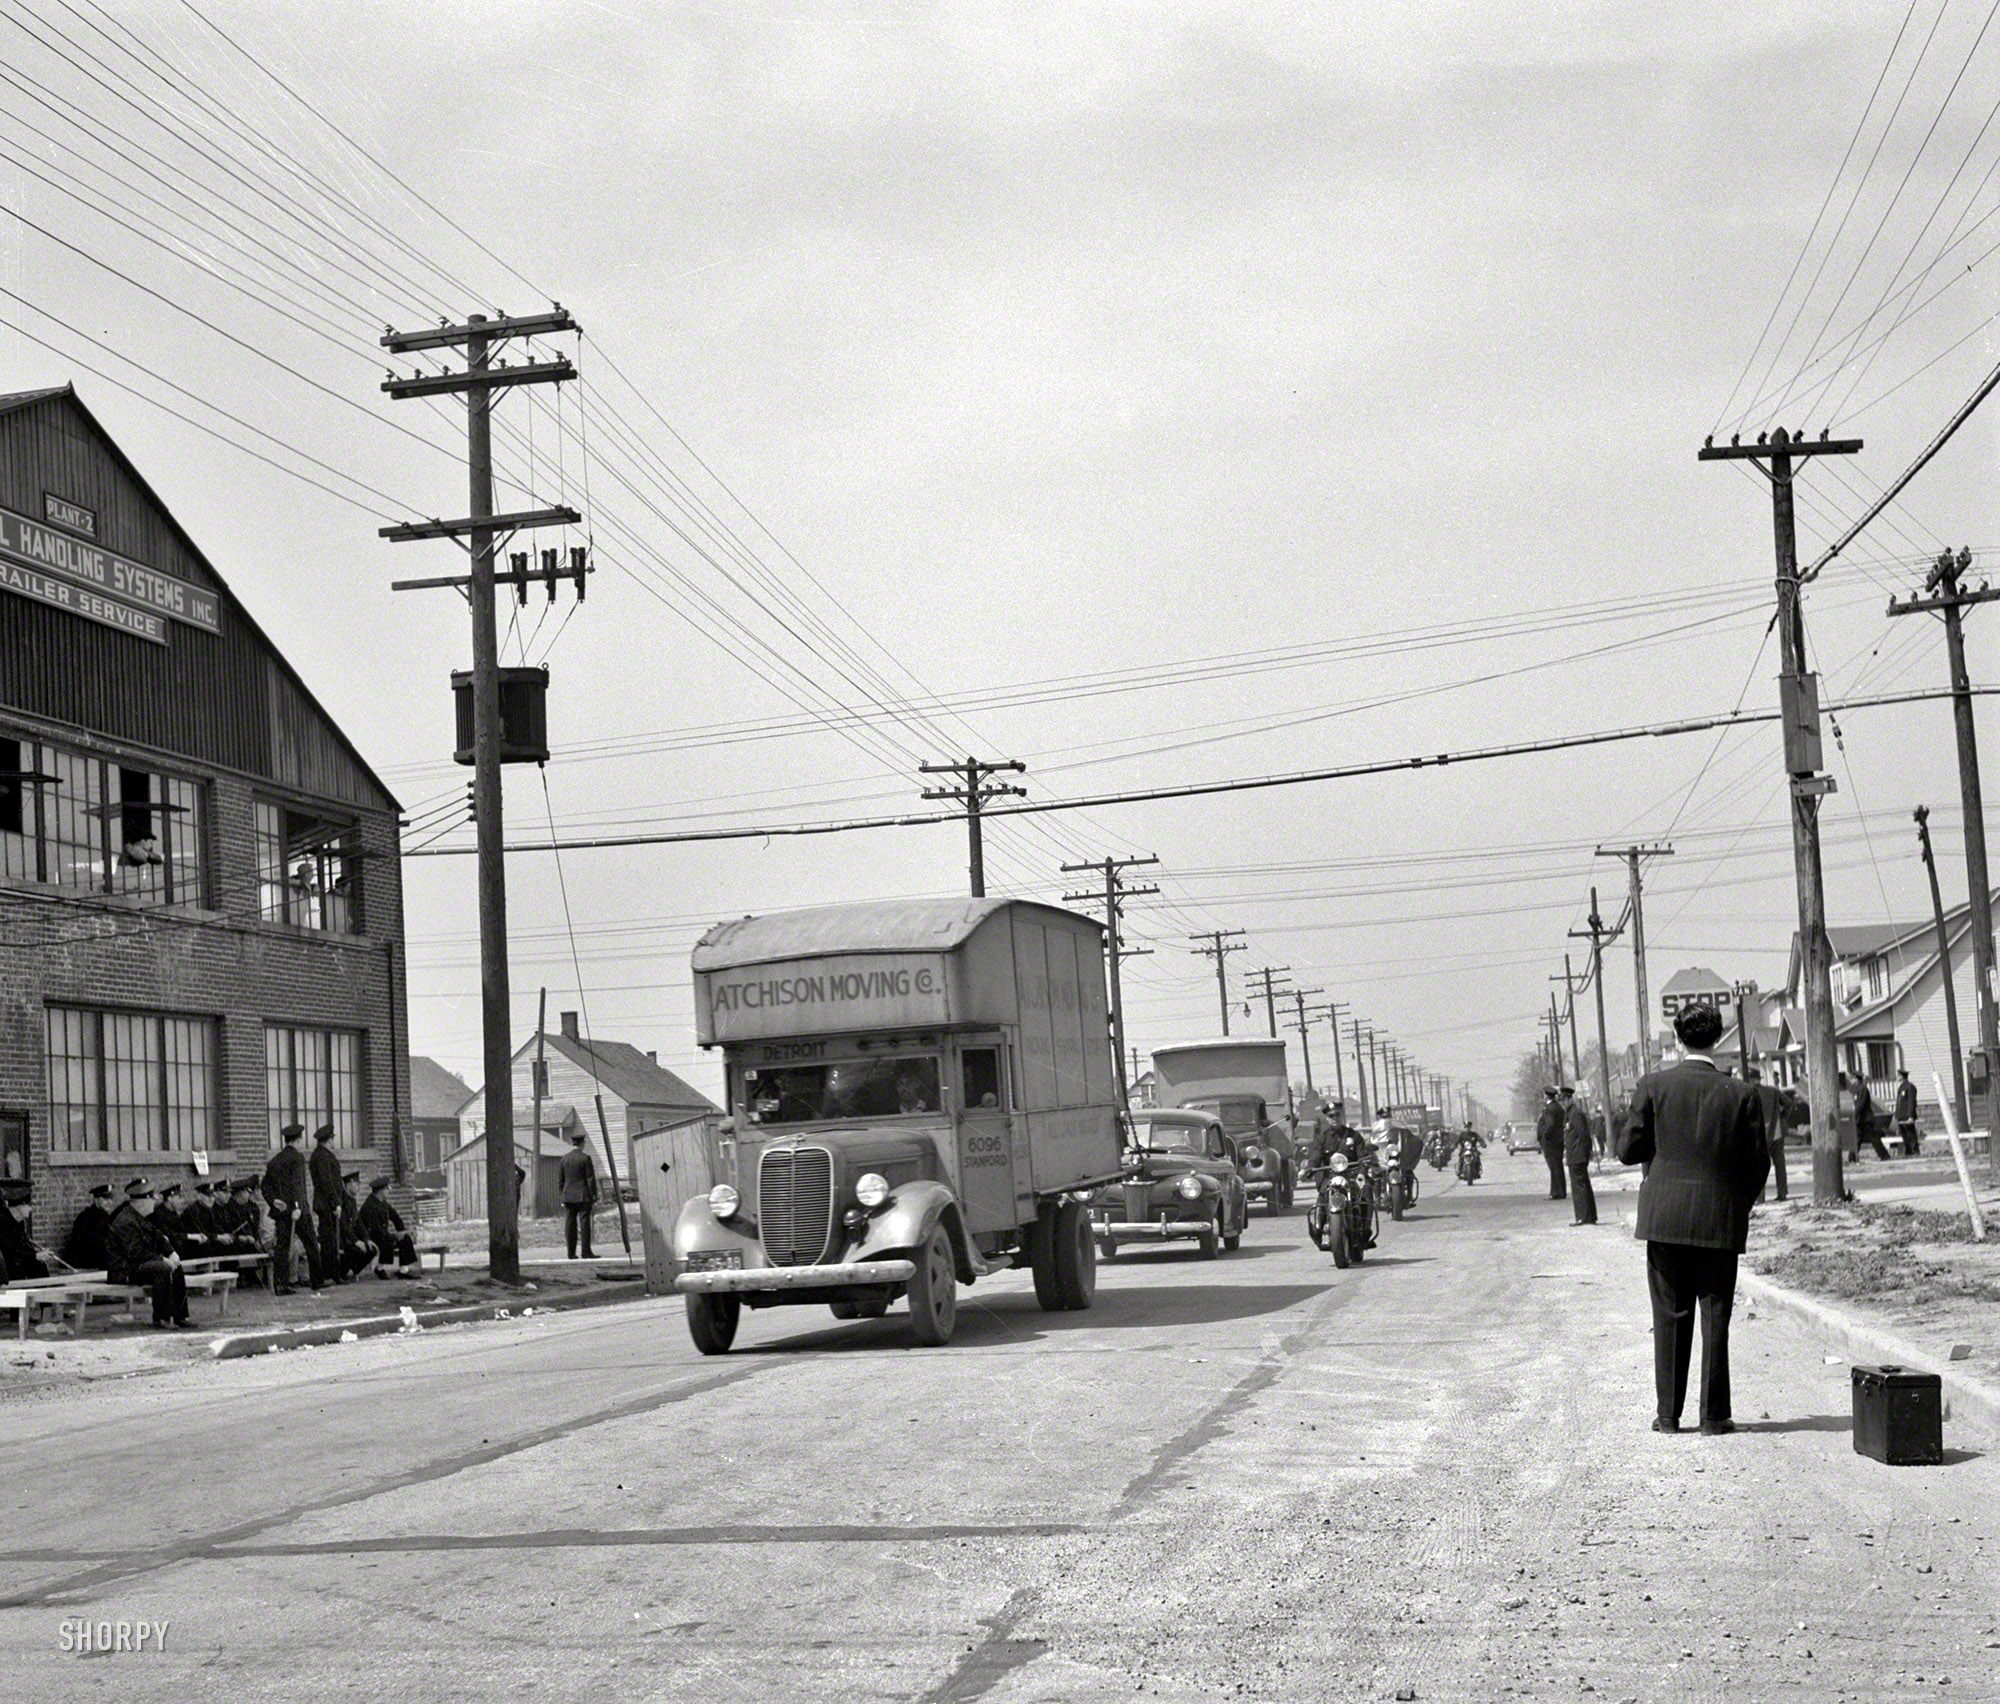 February 1942. Detroit, Michigan. "Riot at the Sojourner Truth Homes, a new U.S. federal housing project, caused by white neighbors' attempt to prevent Negro tenants from moving in. Moving vans convoyed by police department moving Negroes' furniture." Photo by Arthur Siegel. View full size.